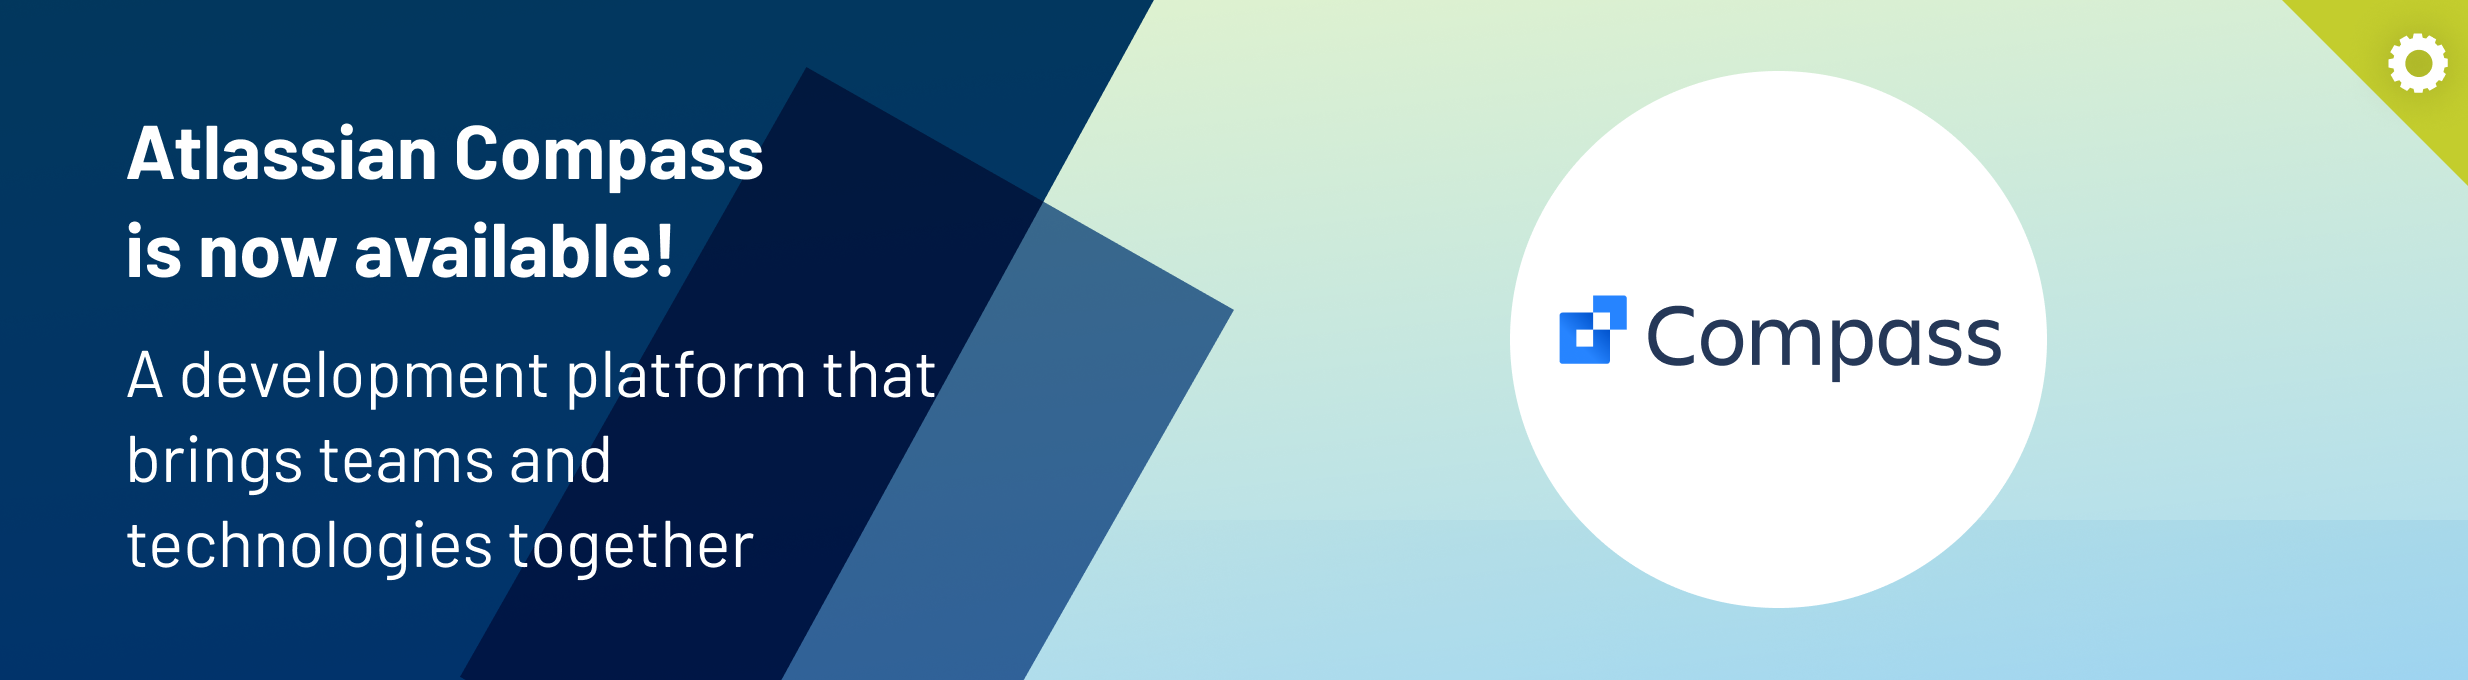 A development platform that brings teams and technologies together: Atlassian Compass is now available! - banner